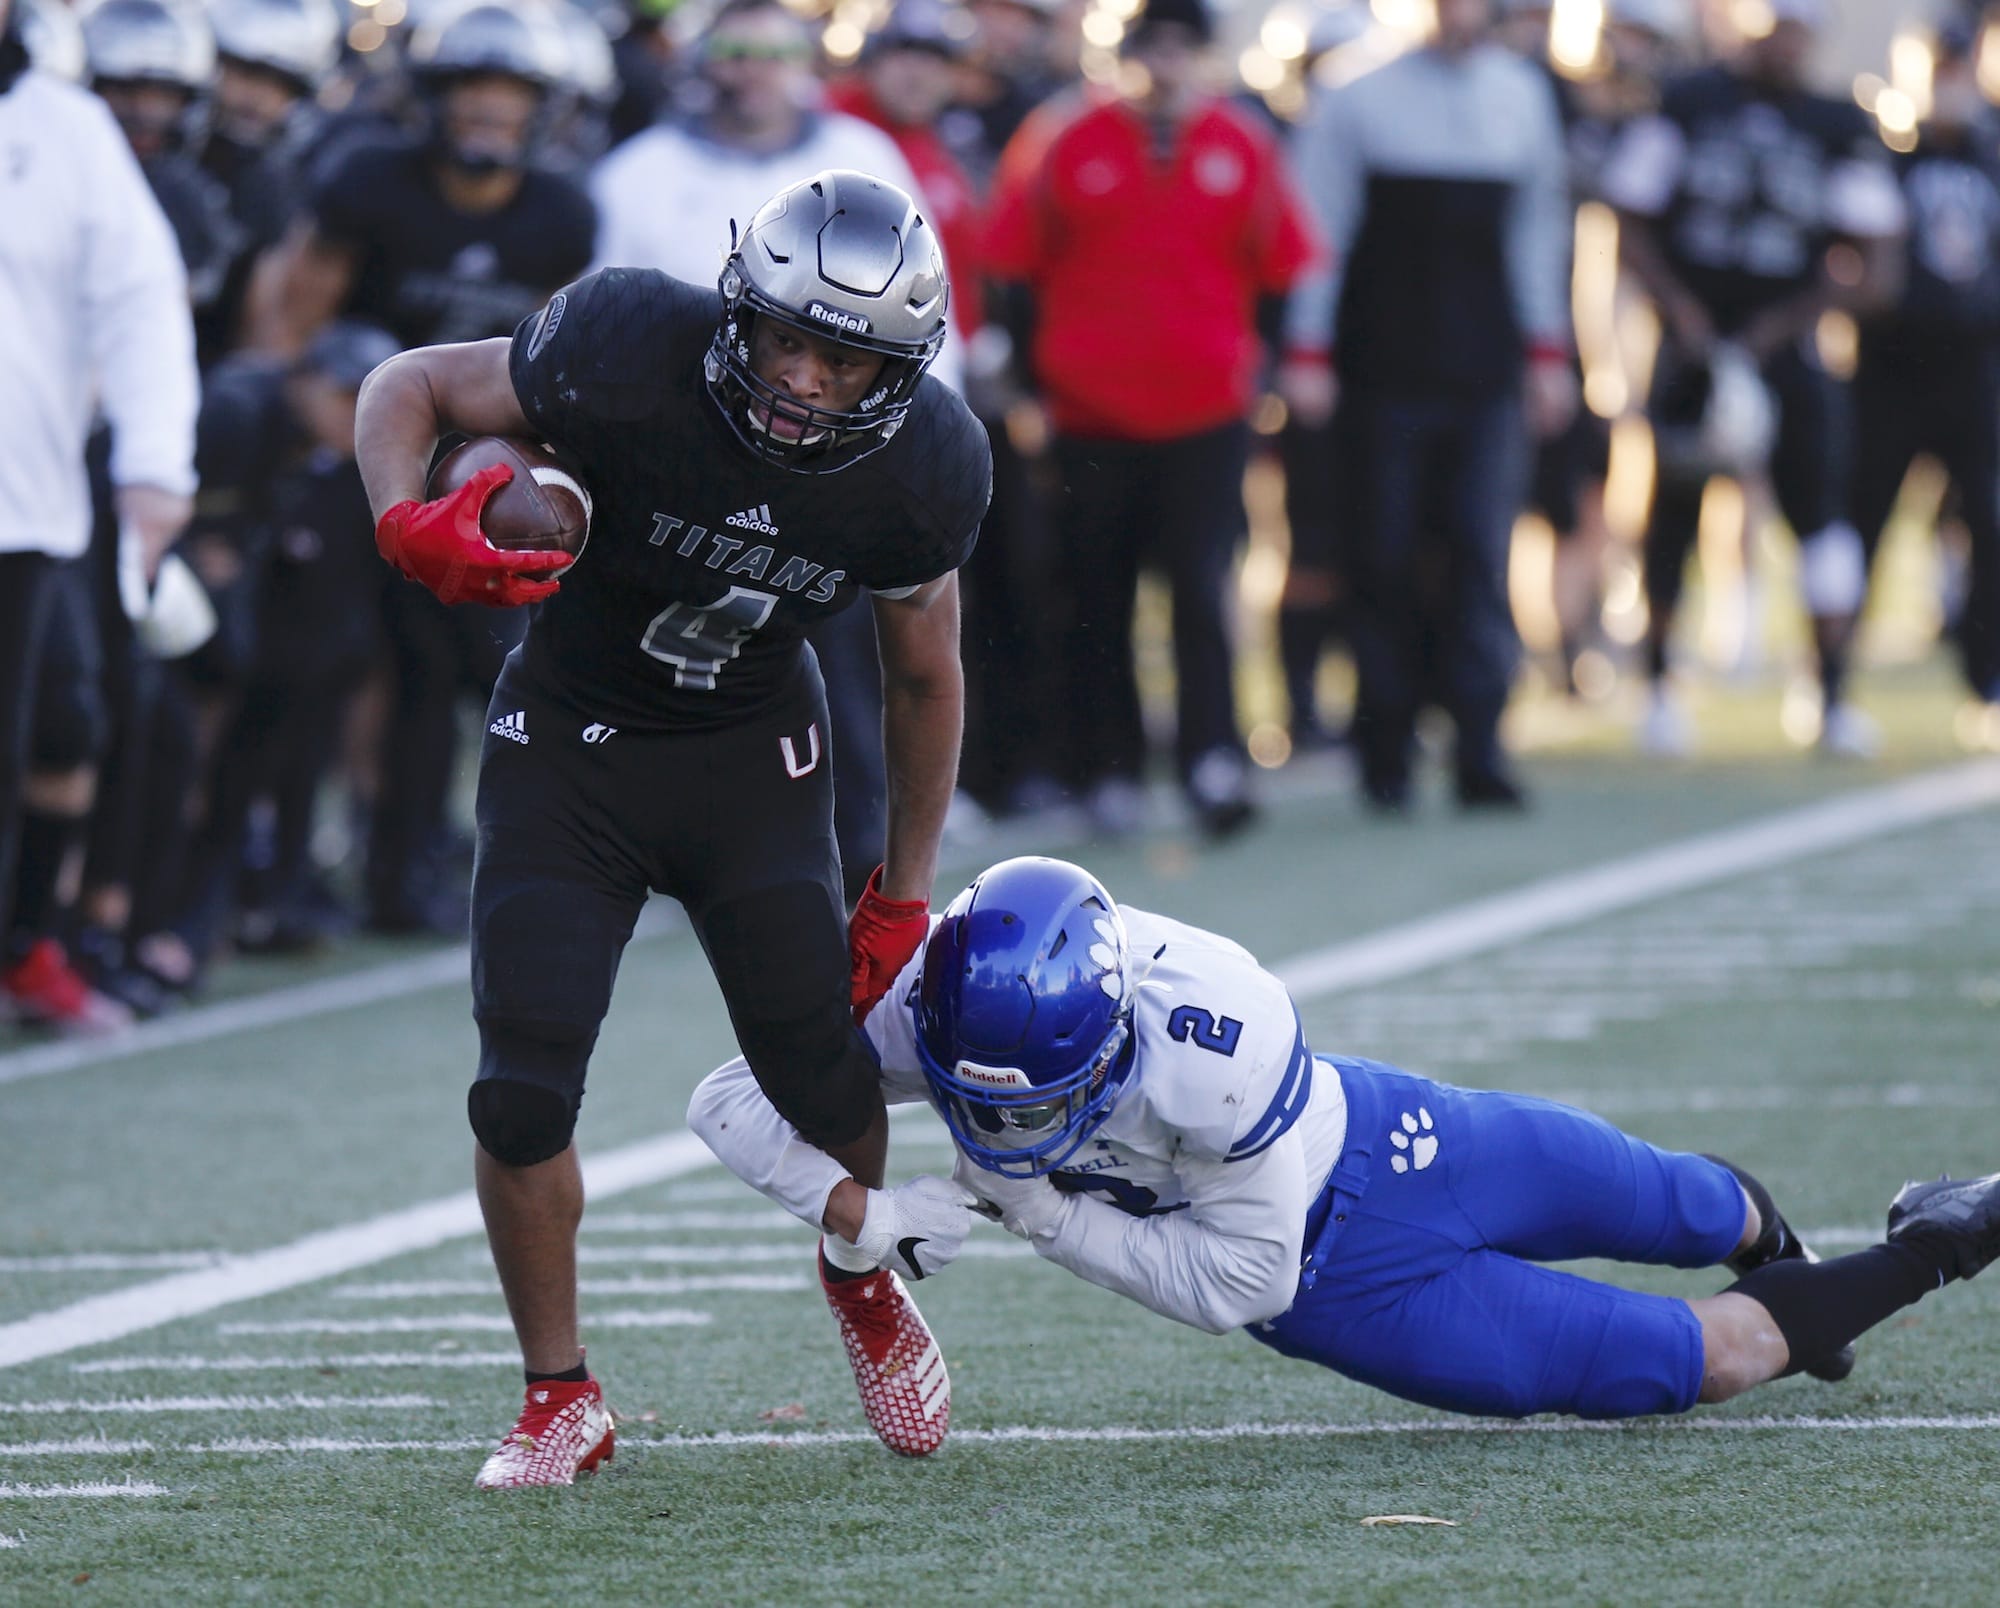 Union running back Isaiah Jones, left, sheds a tackle by Bothell defensive back Darius Kubalanza in the 4A state football quarterfinals.